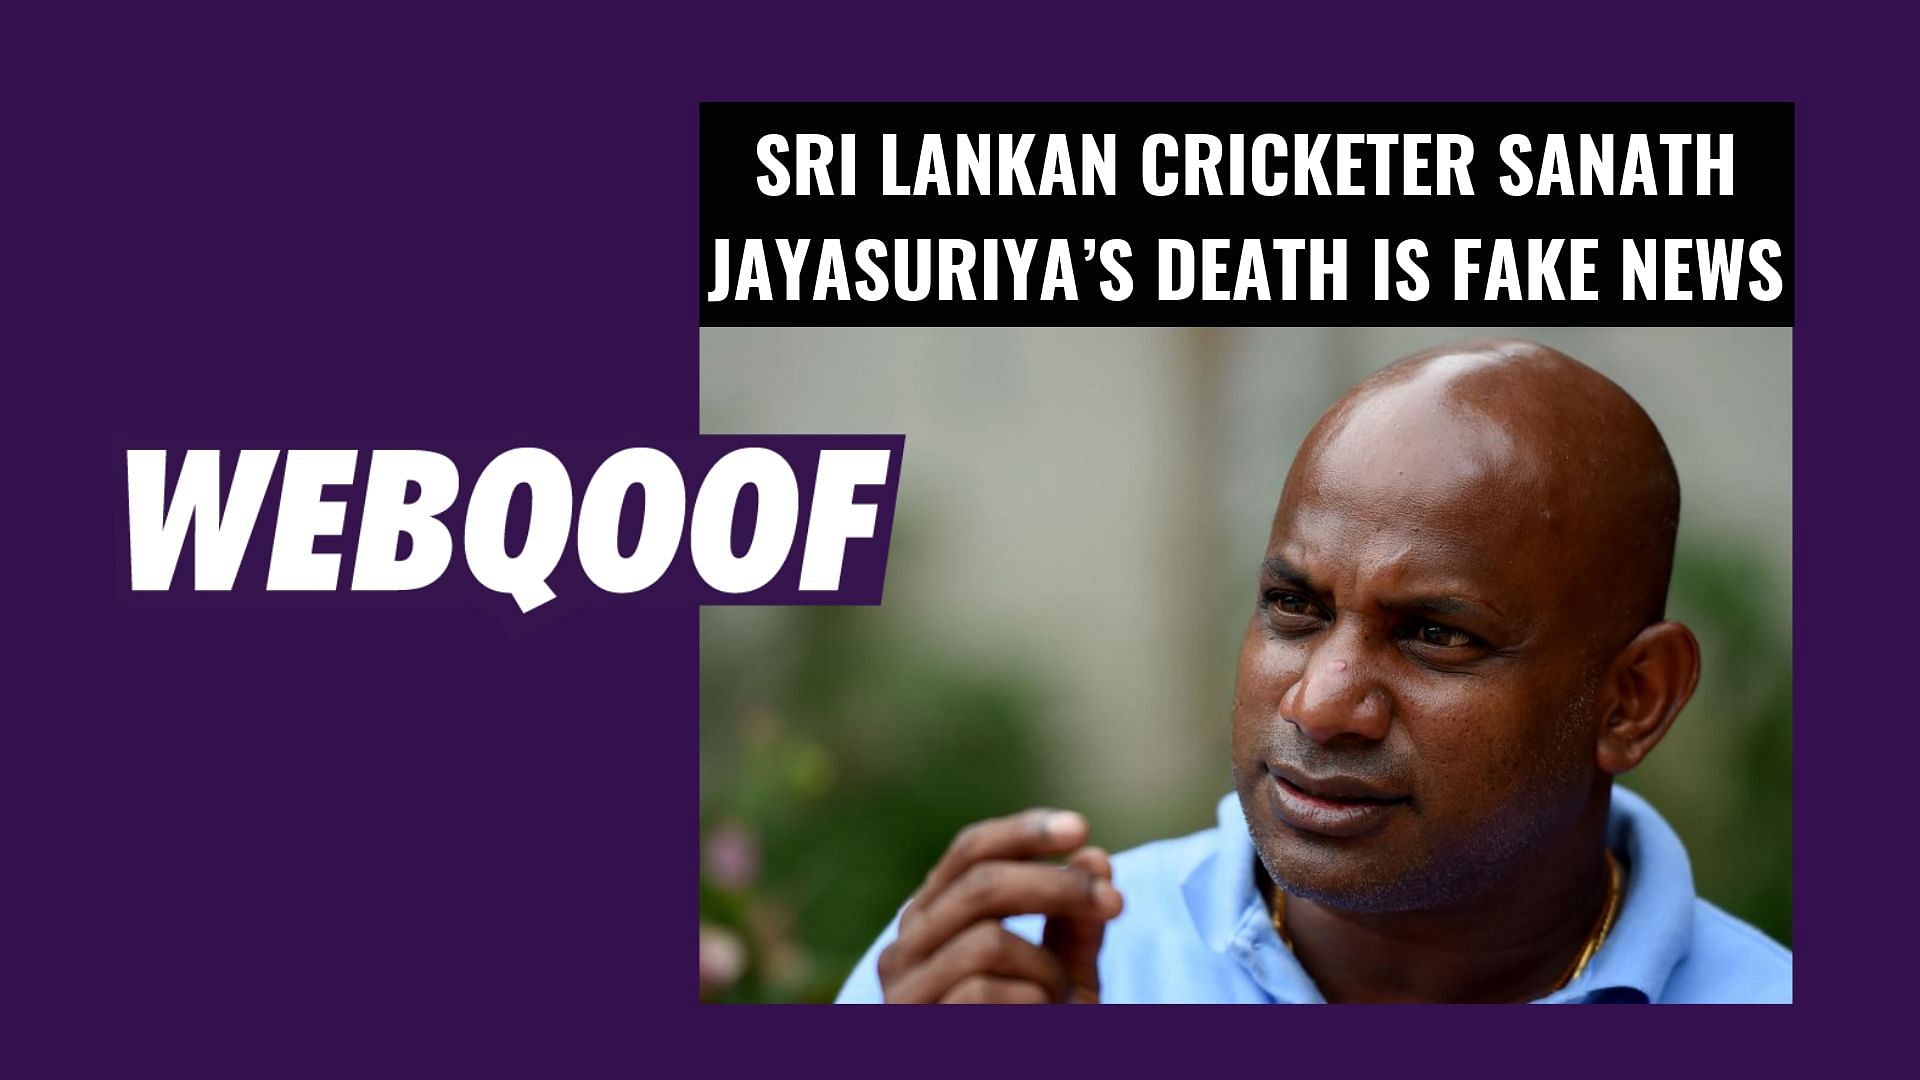 An online website claimed that a man involved in a car accident in Canada was identified as Jayasuriya.